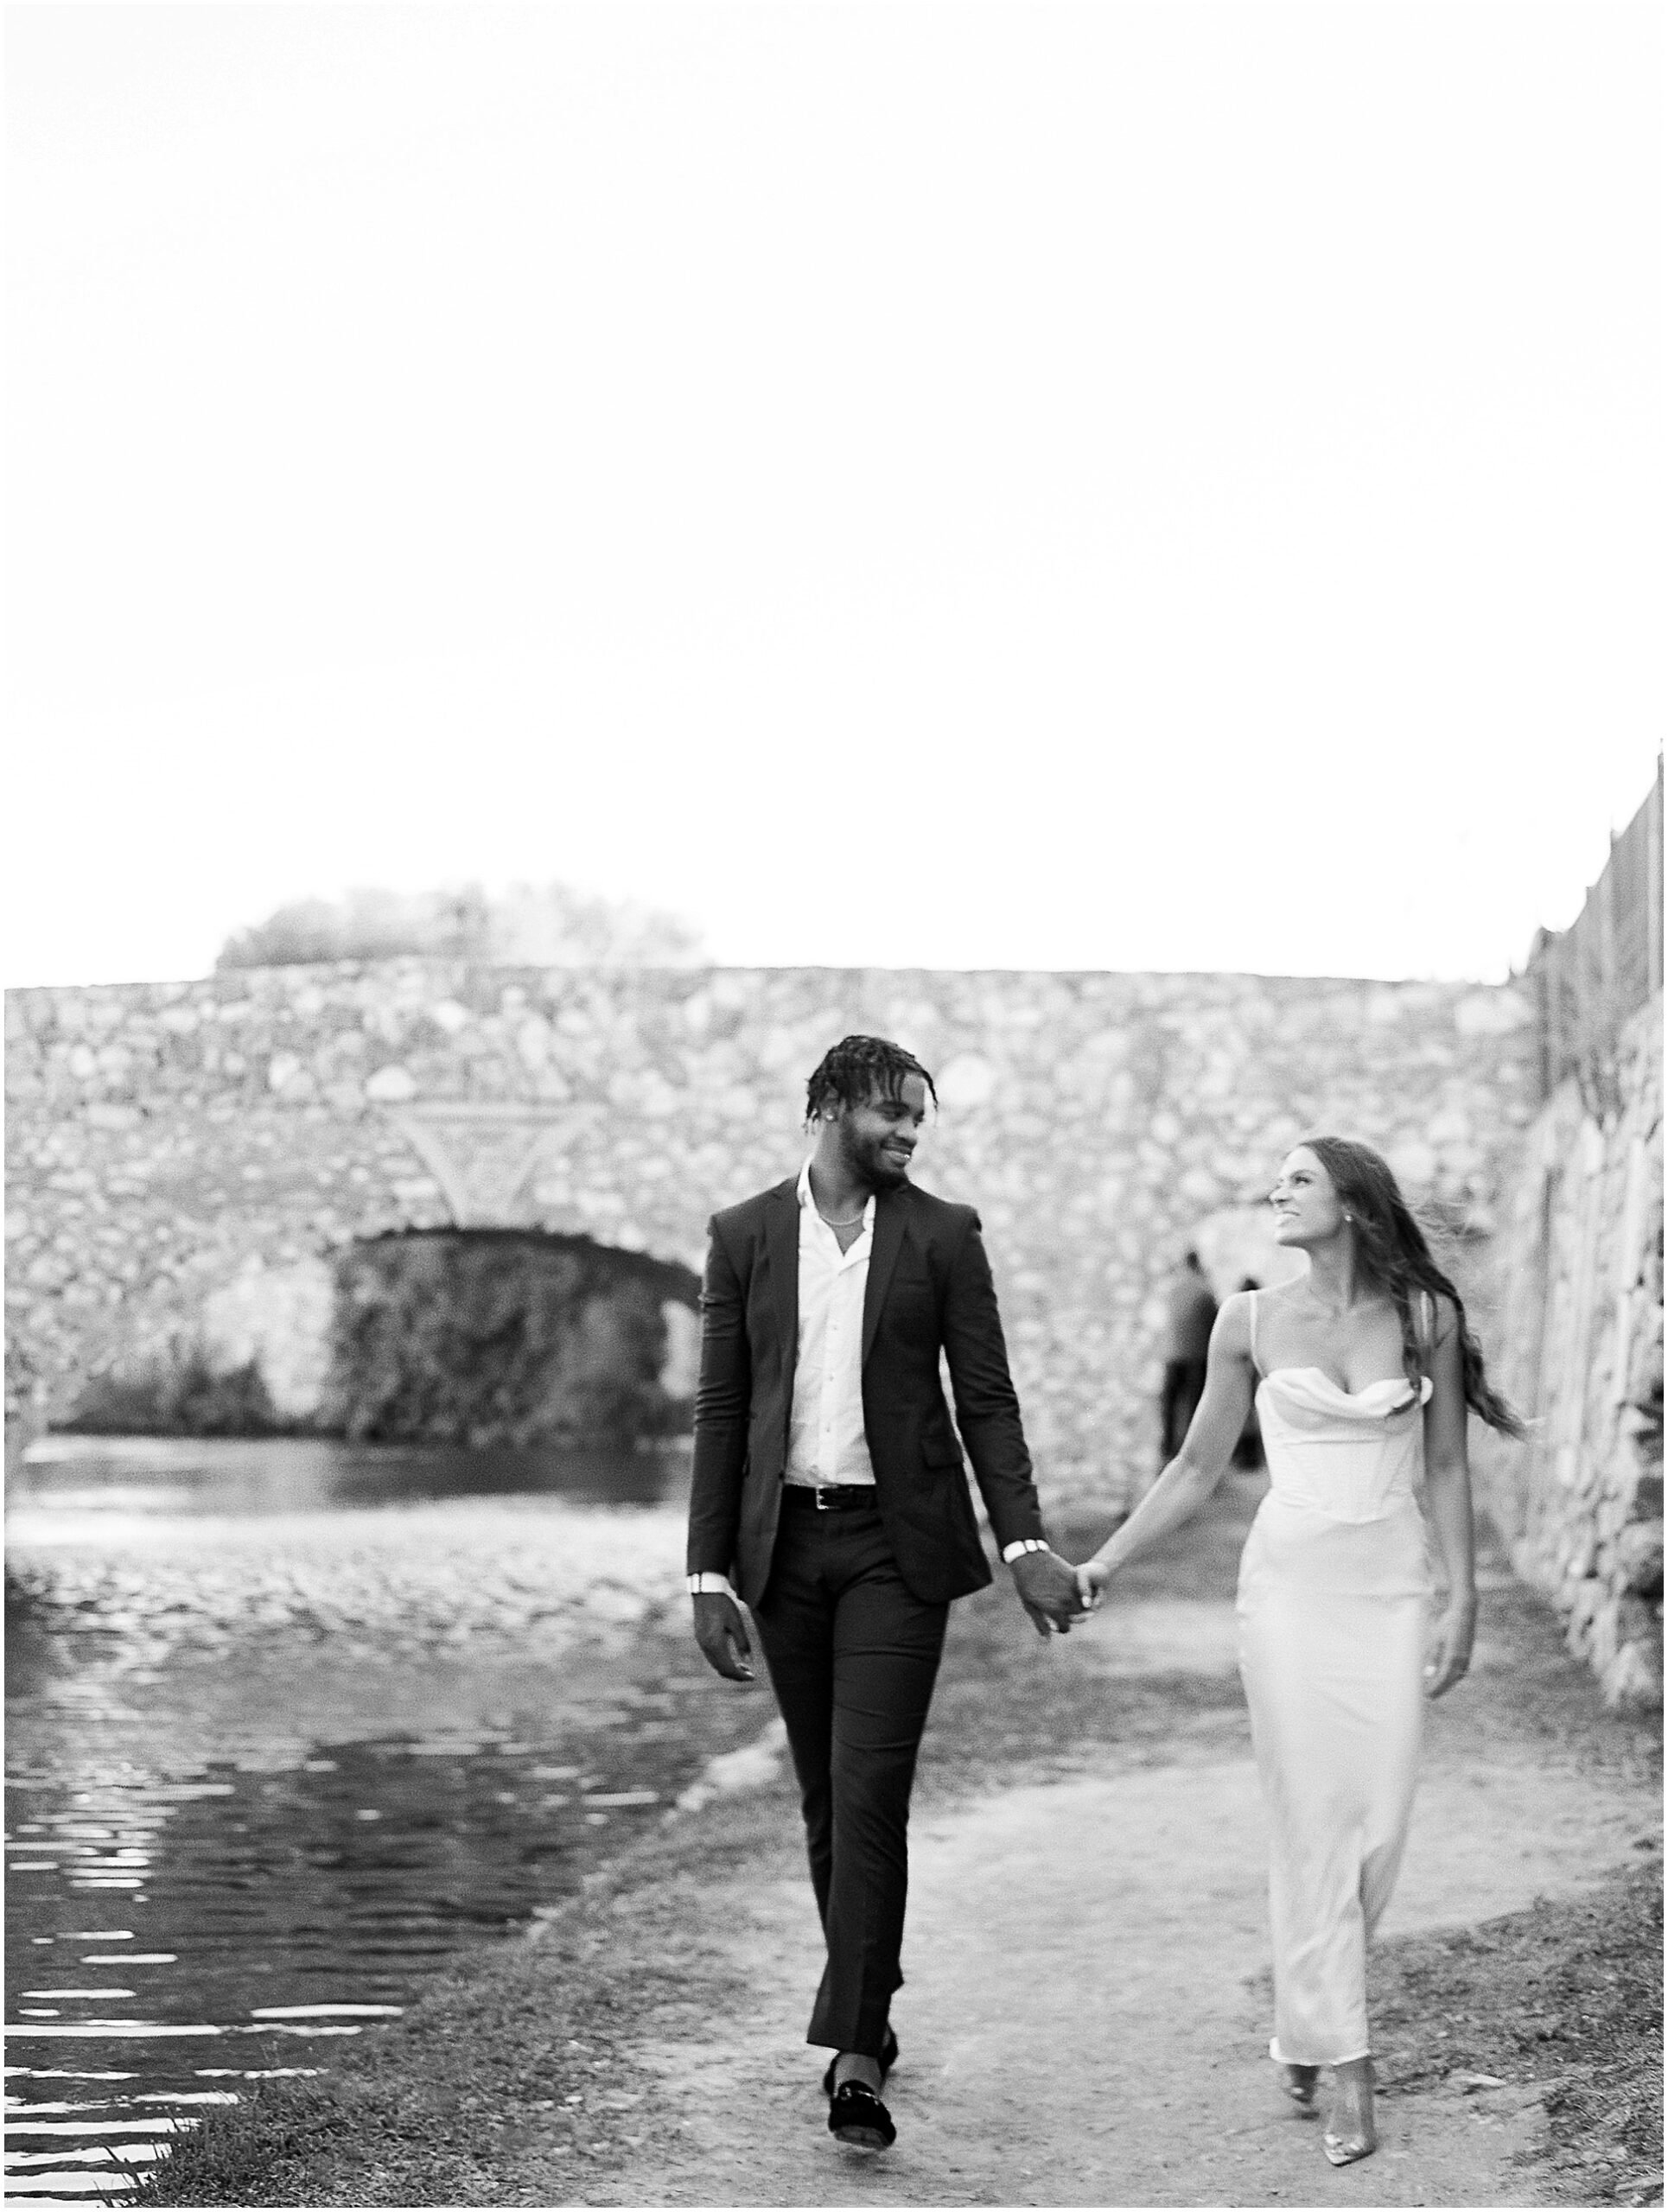 Stylish and Chic couple walking holding hands at adriatica village.